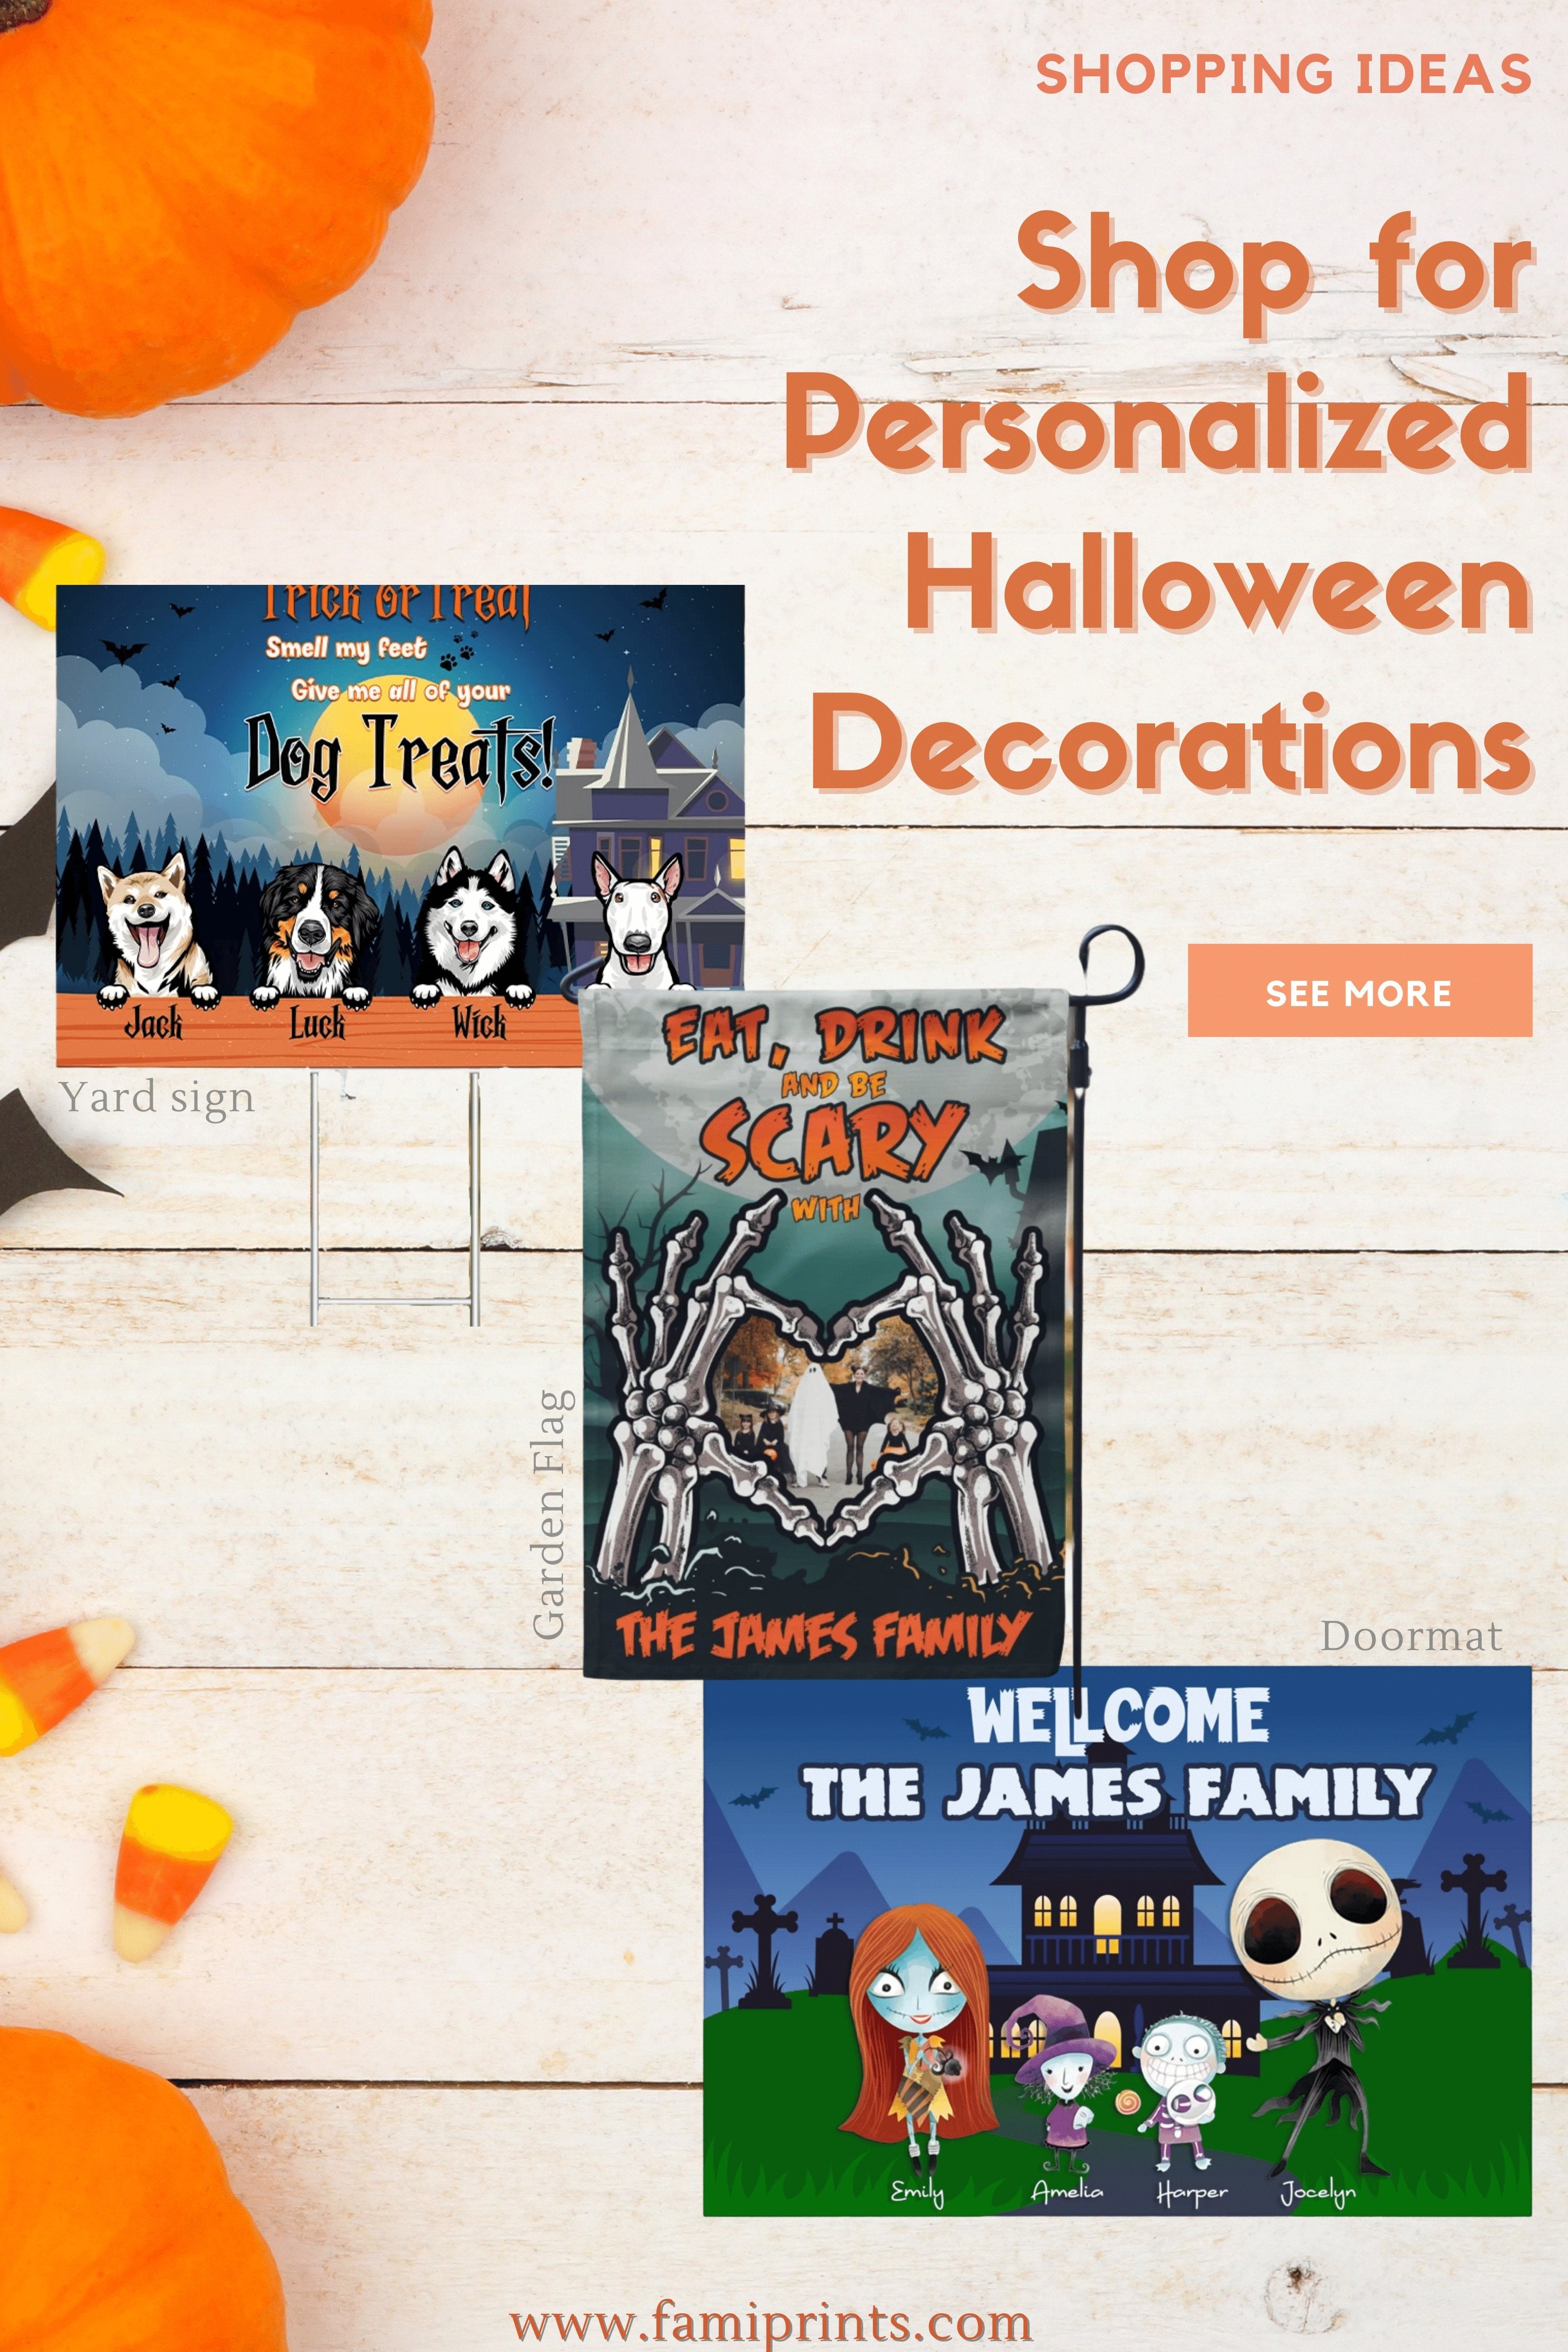 New Custom Halloween Decorations | FamiPrints | Trending Personalized Family Gifts